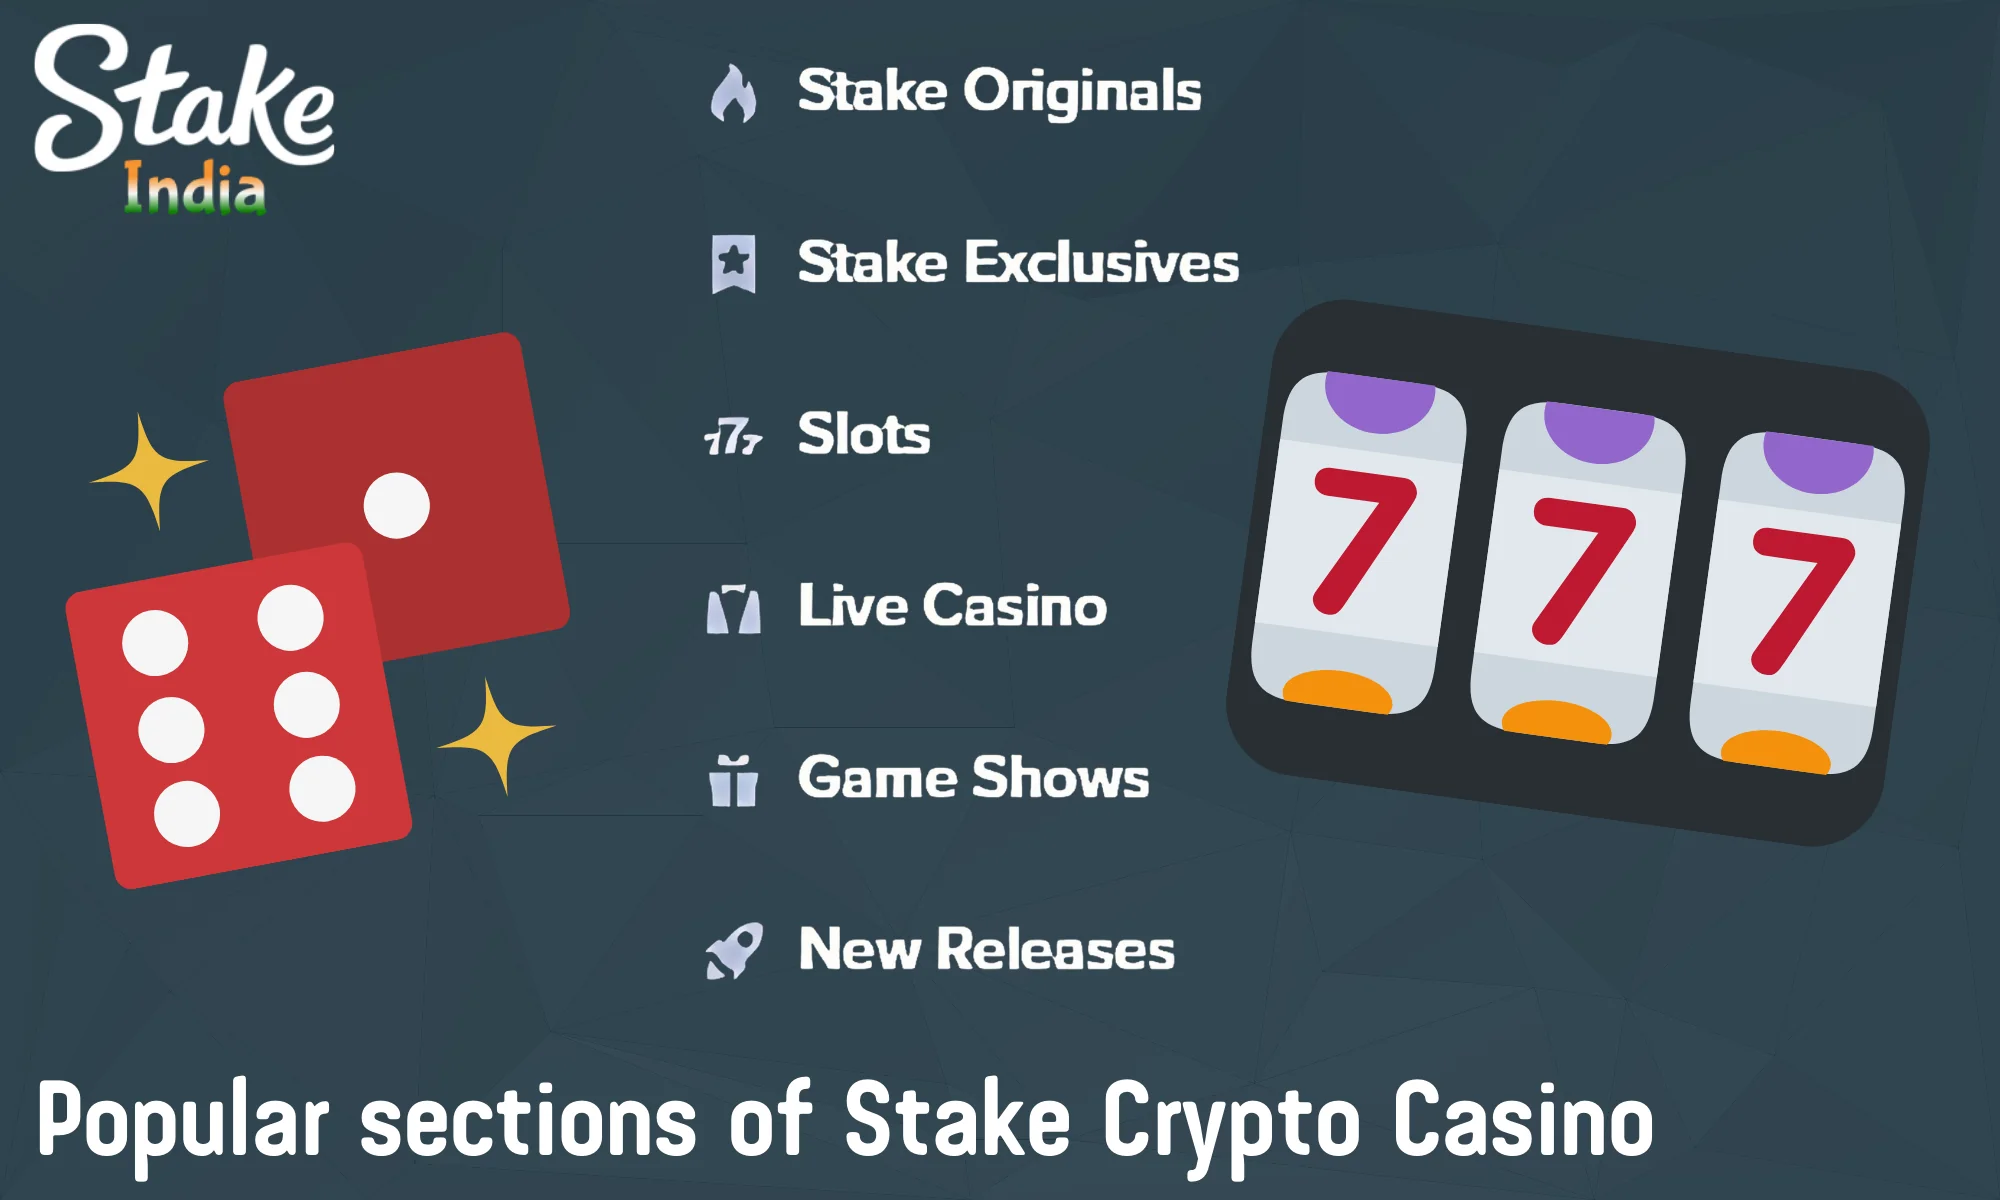 Stake Crypto Casino offers more than 3,000 games from leading developers